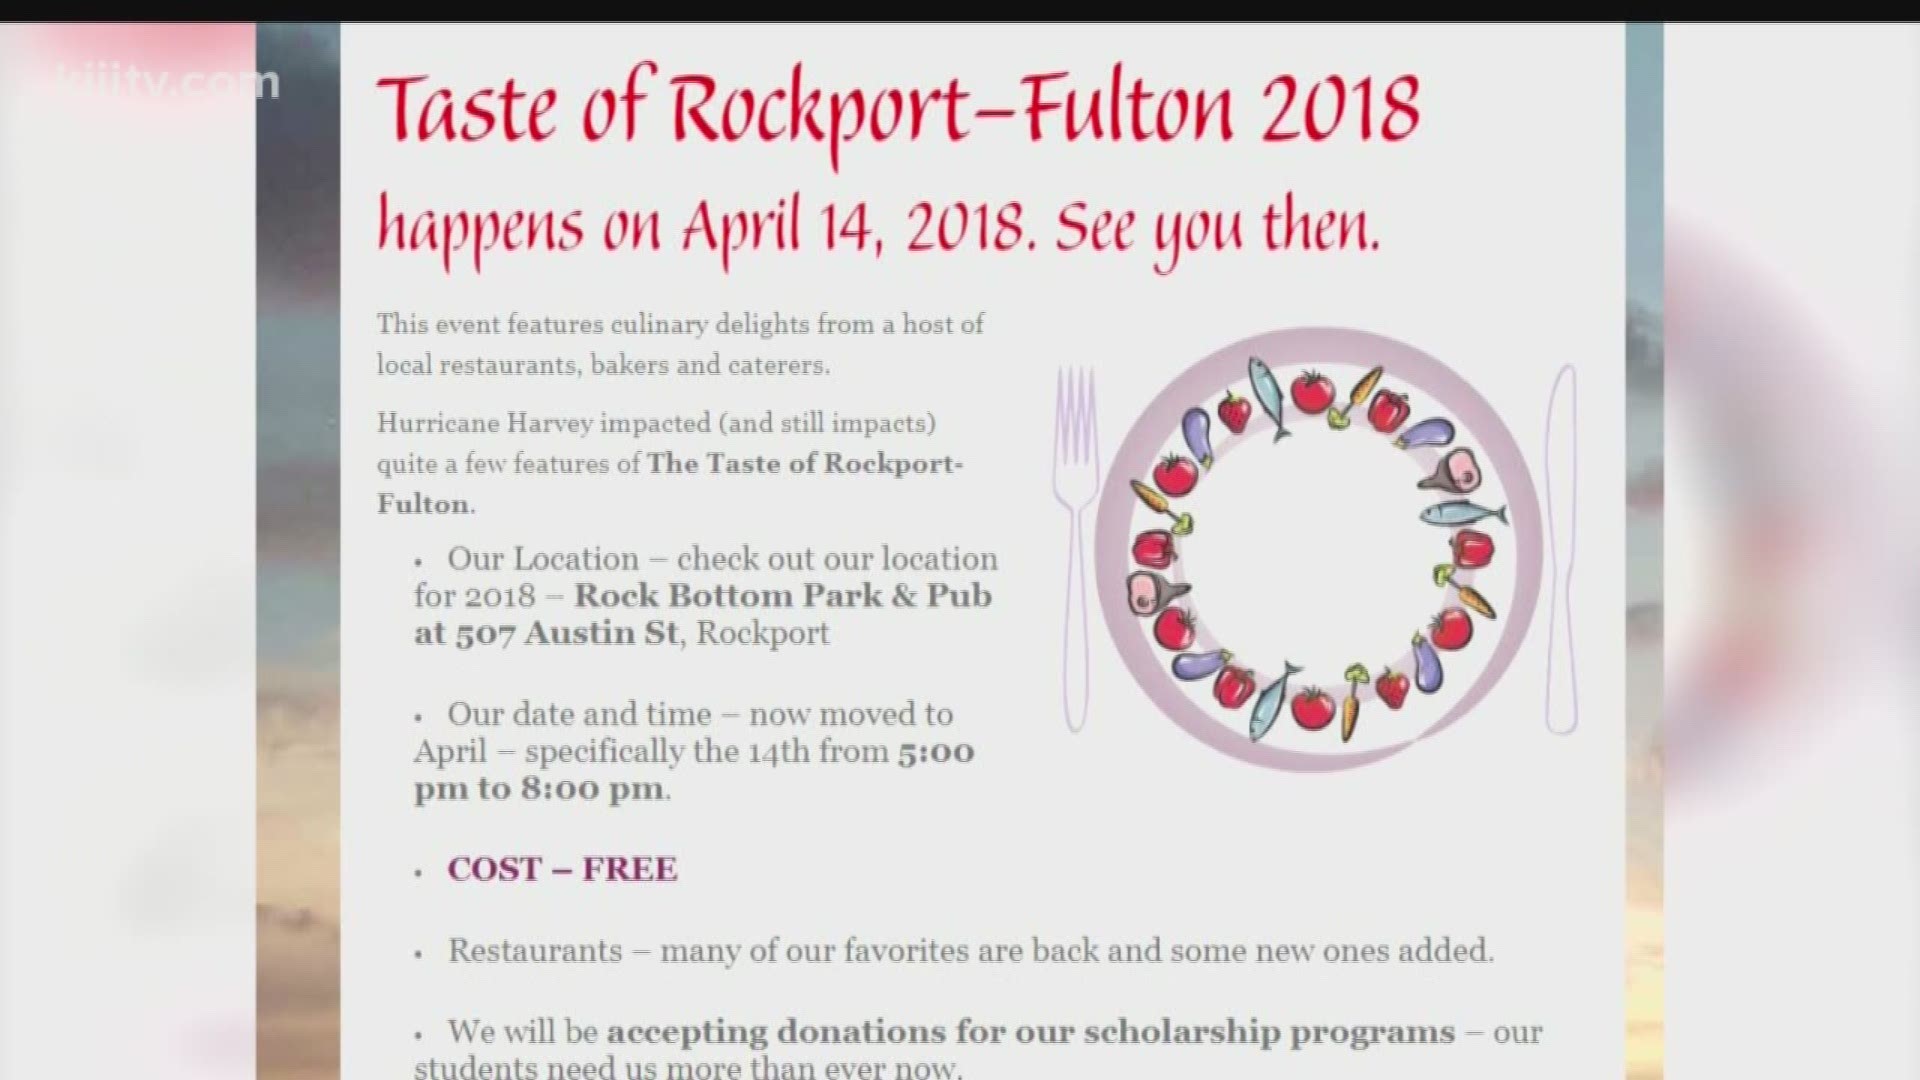 Organizers said this year the event would be free to the public but any donations made will go towards scholarships for graduates of Rockport-Fulton High School.  